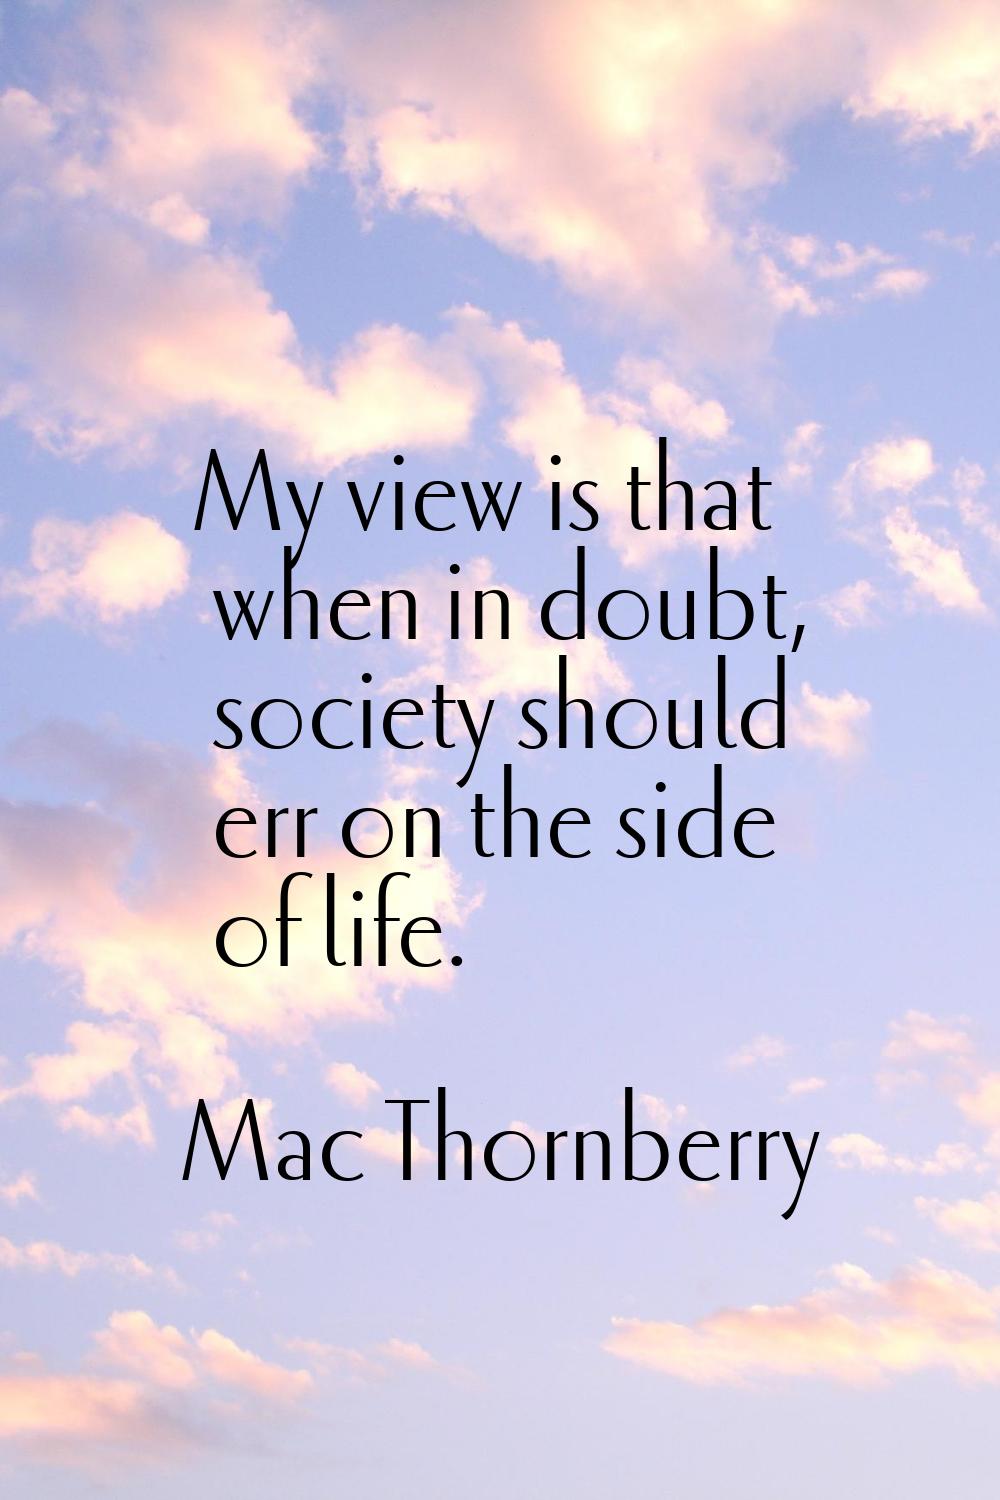 My view is that when in doubt, society should err on the side of life.